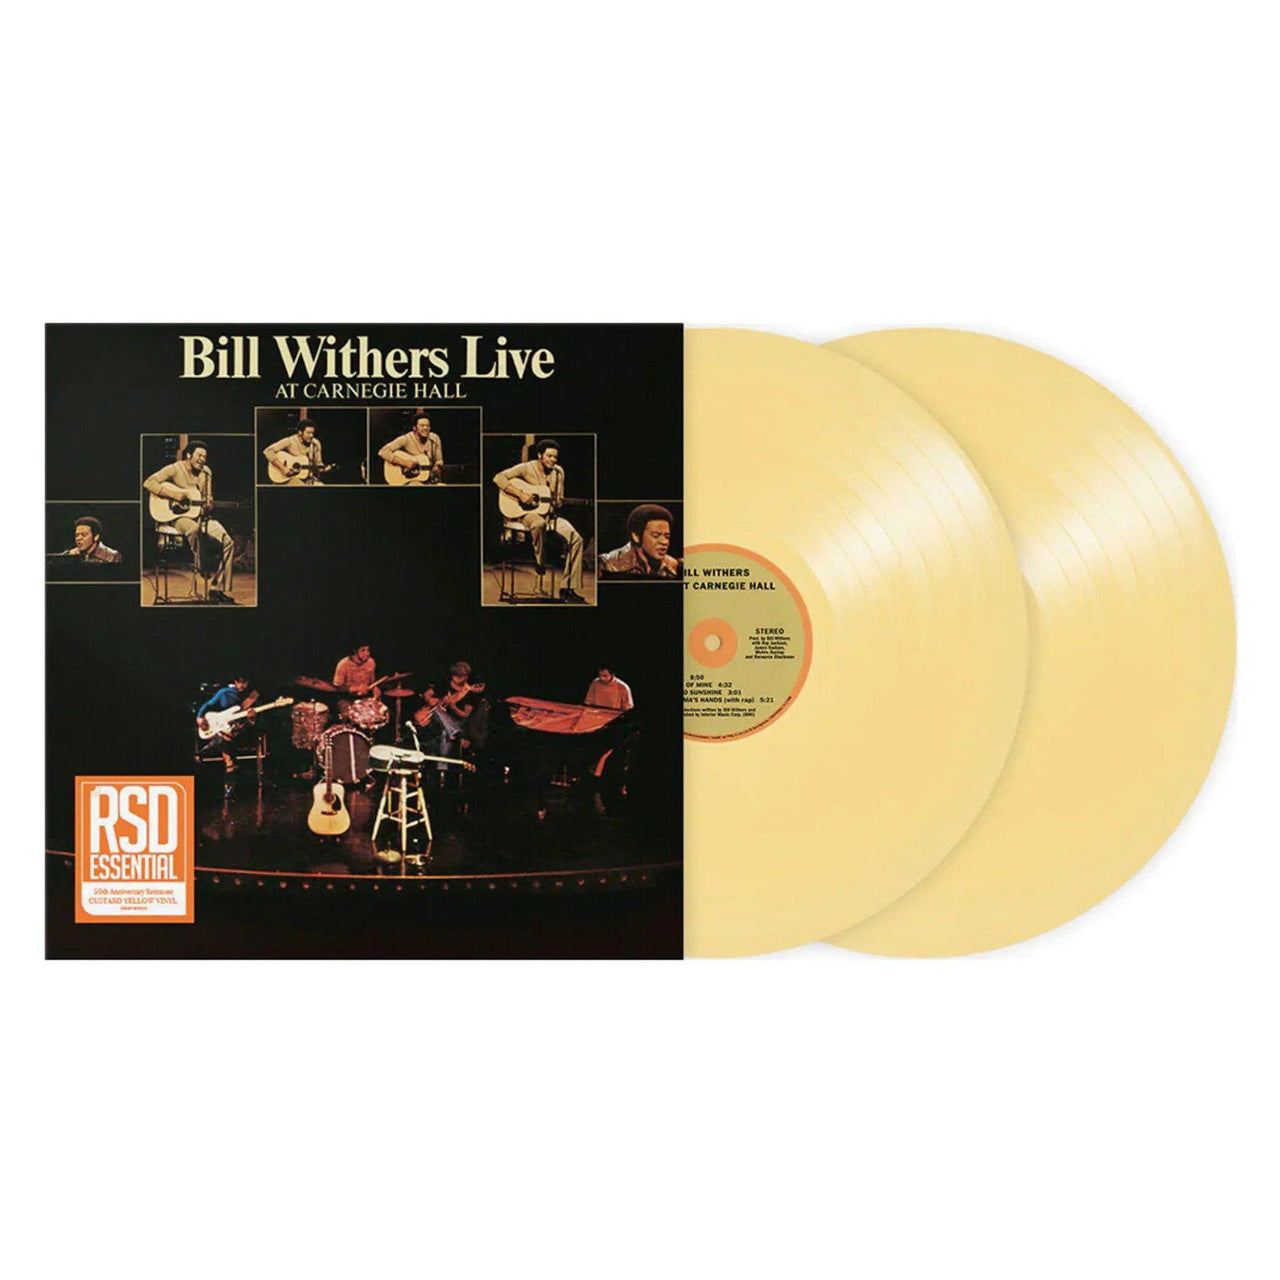 Bill Withers: Live At Carnegie Hall Vinyl LP (Custard Yellow)